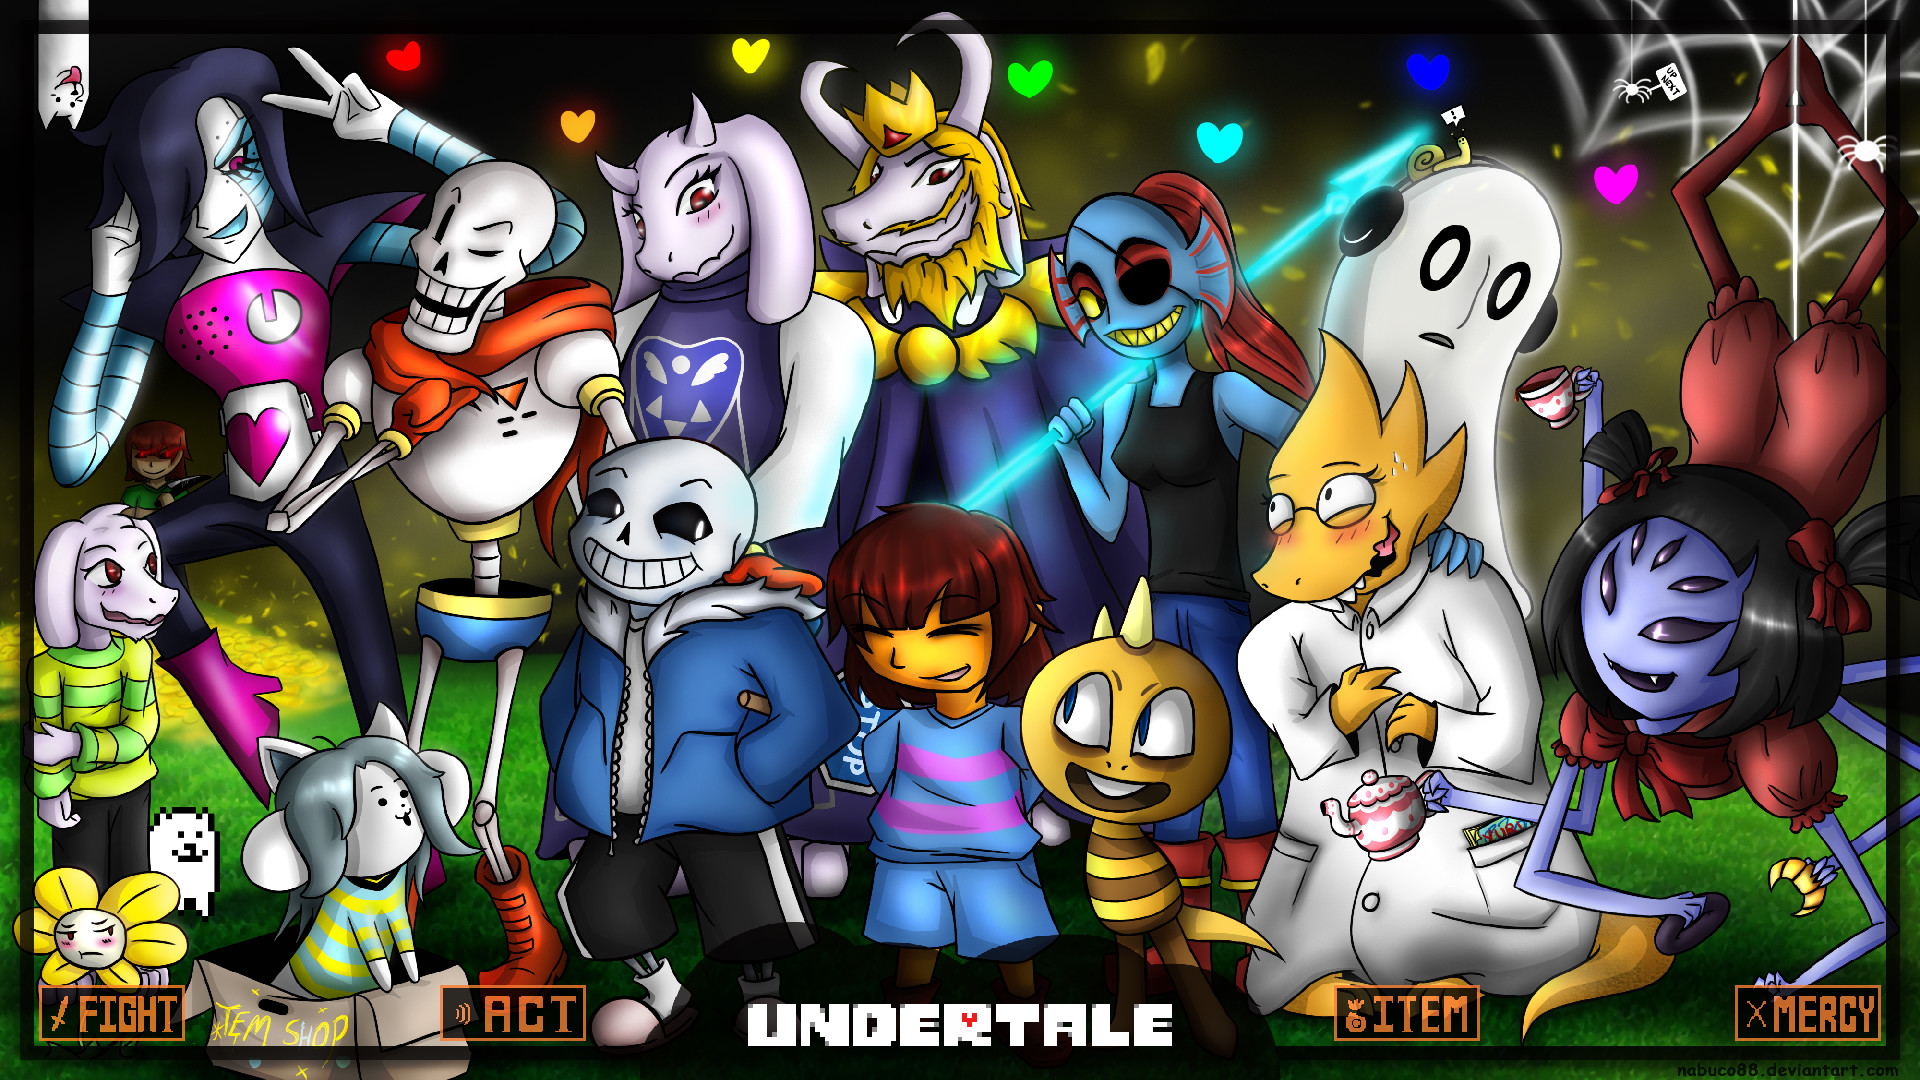 1920x1080 Undertale High Quality Wallpapers Gallery, DL.6124388